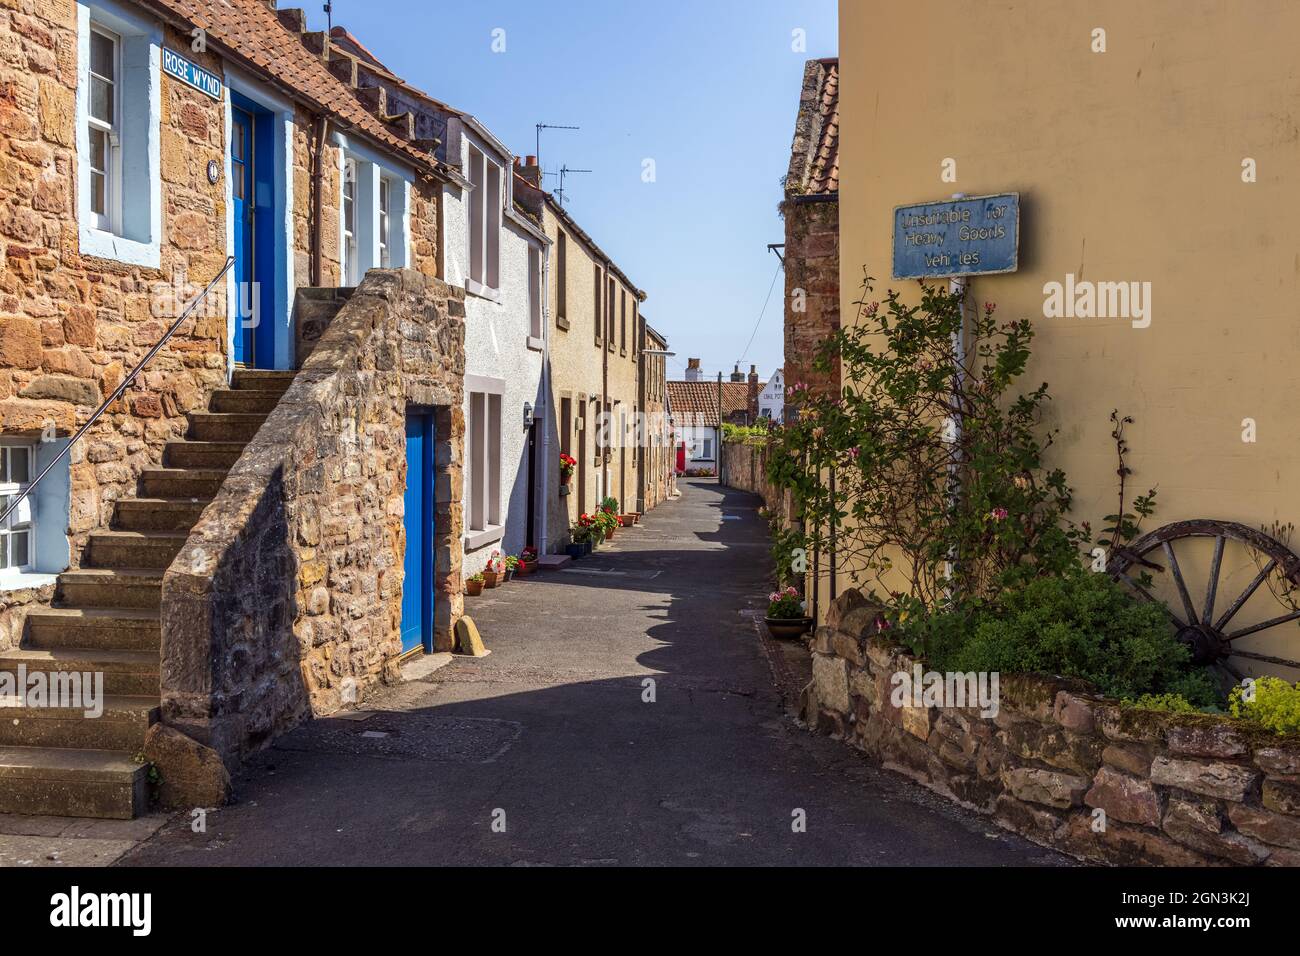 The narrow street of Rose Wynd in Crail, a charming fishing village in the East Neuk of Fife, Scotland. Stock Photo